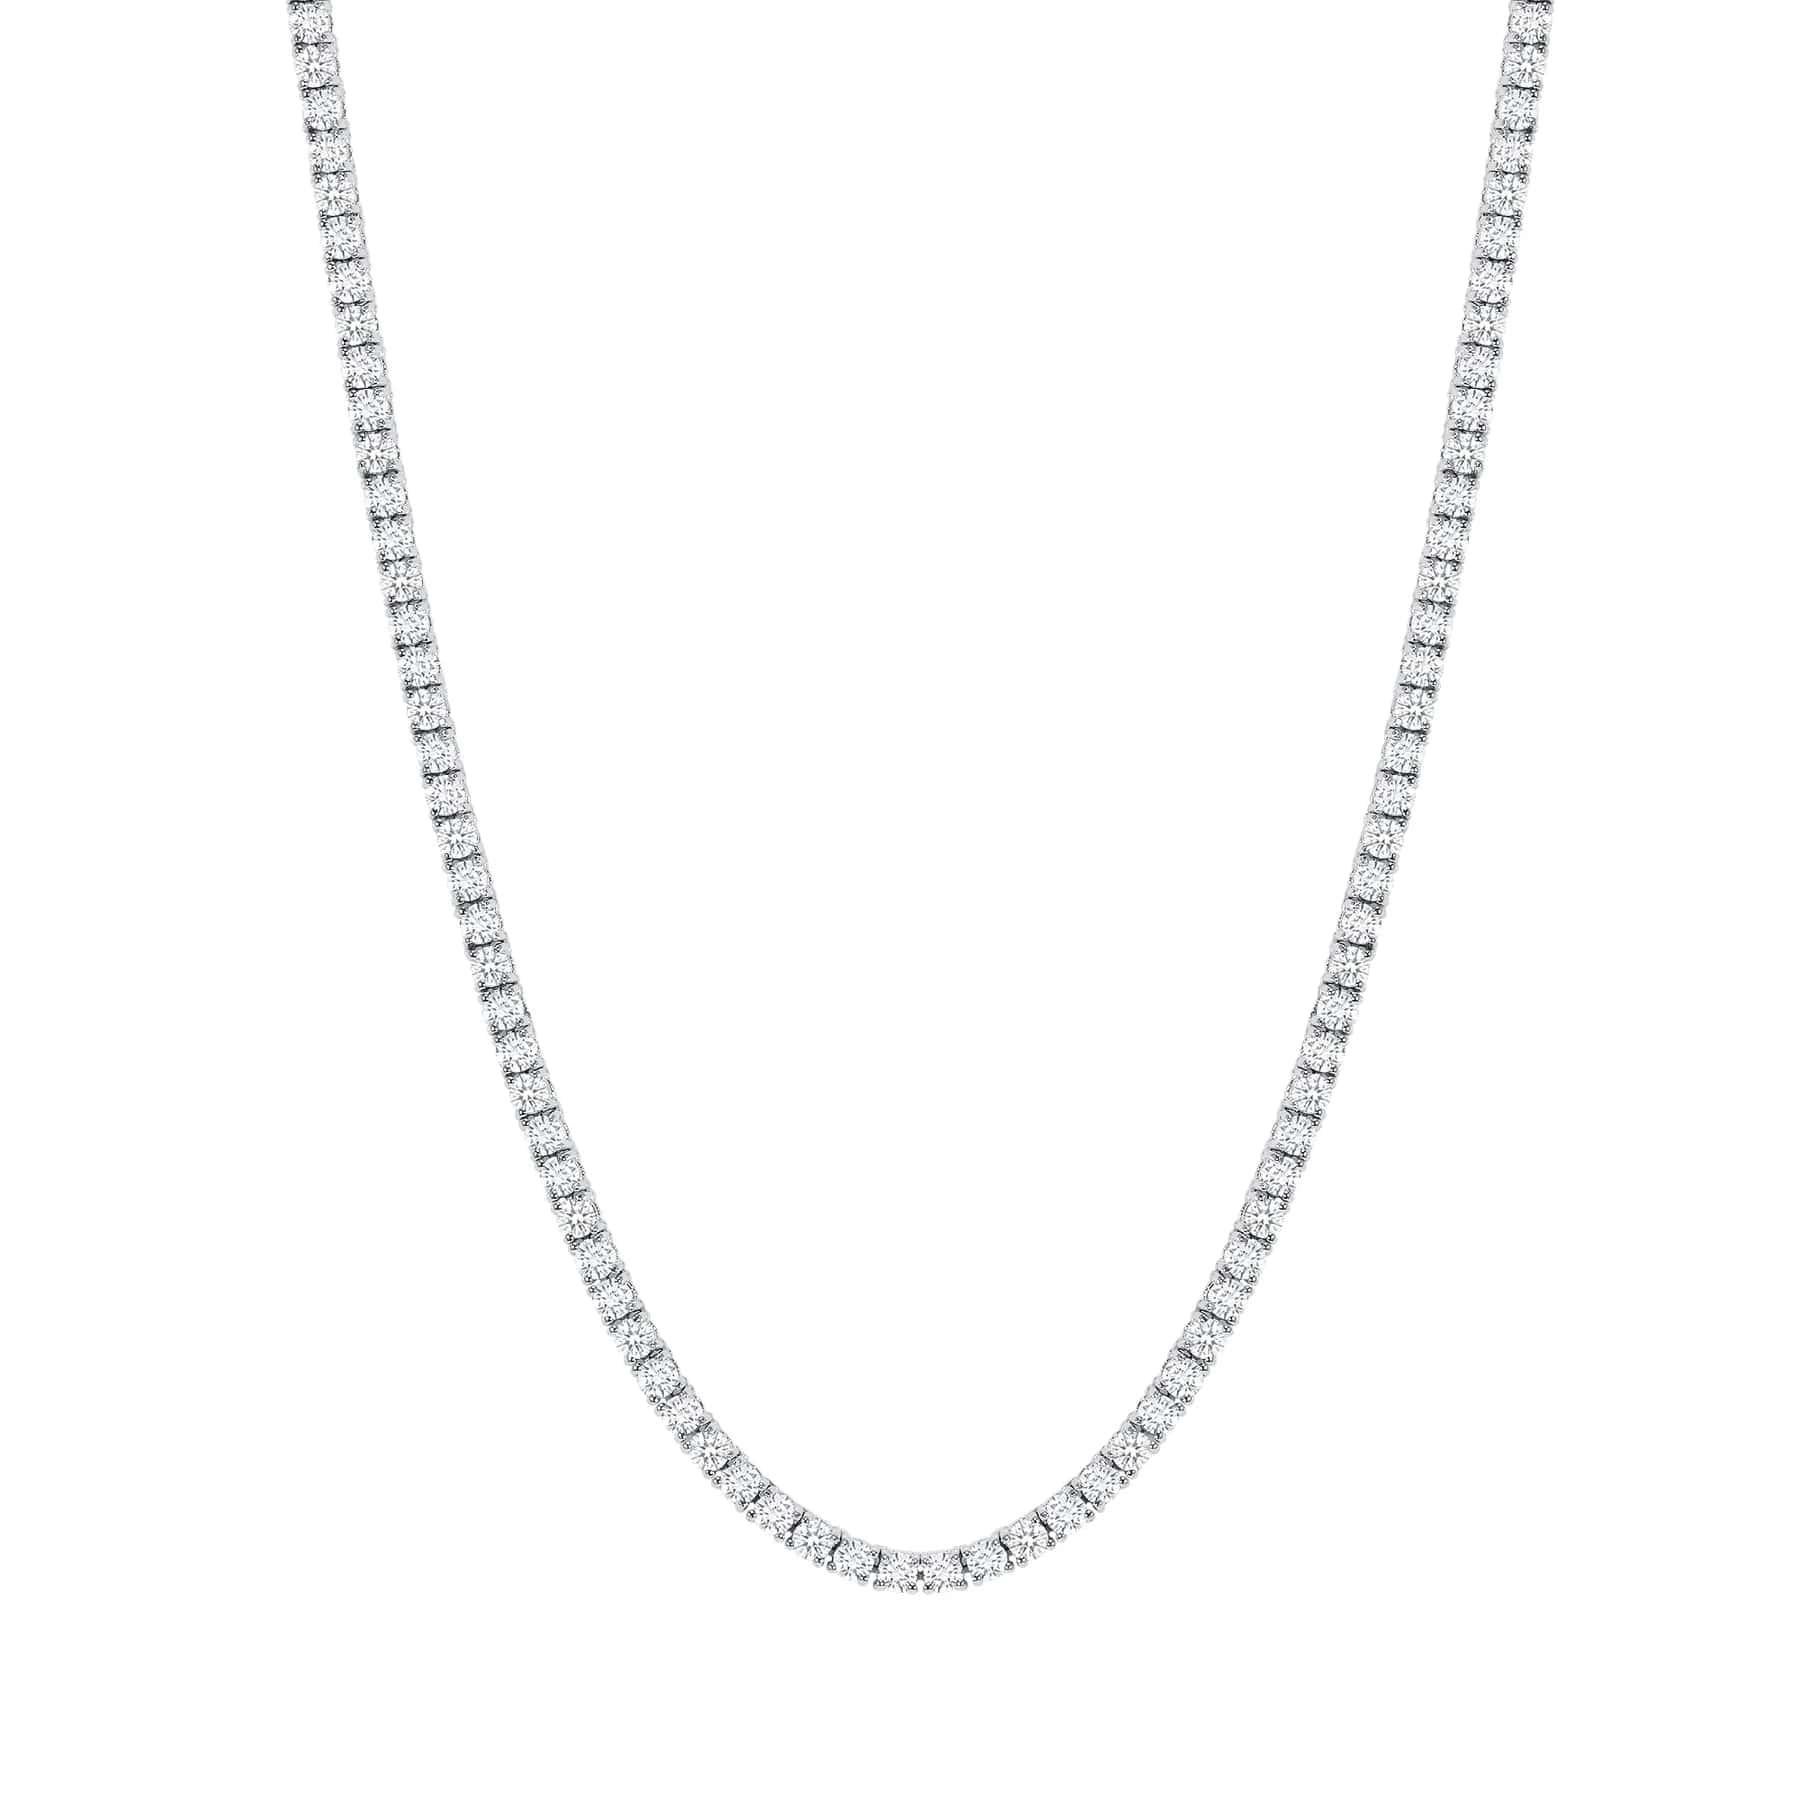 15 Carat Diamond Tennis Necklace - Round Diamond In New Condition For Sale In Los Angeles, CA